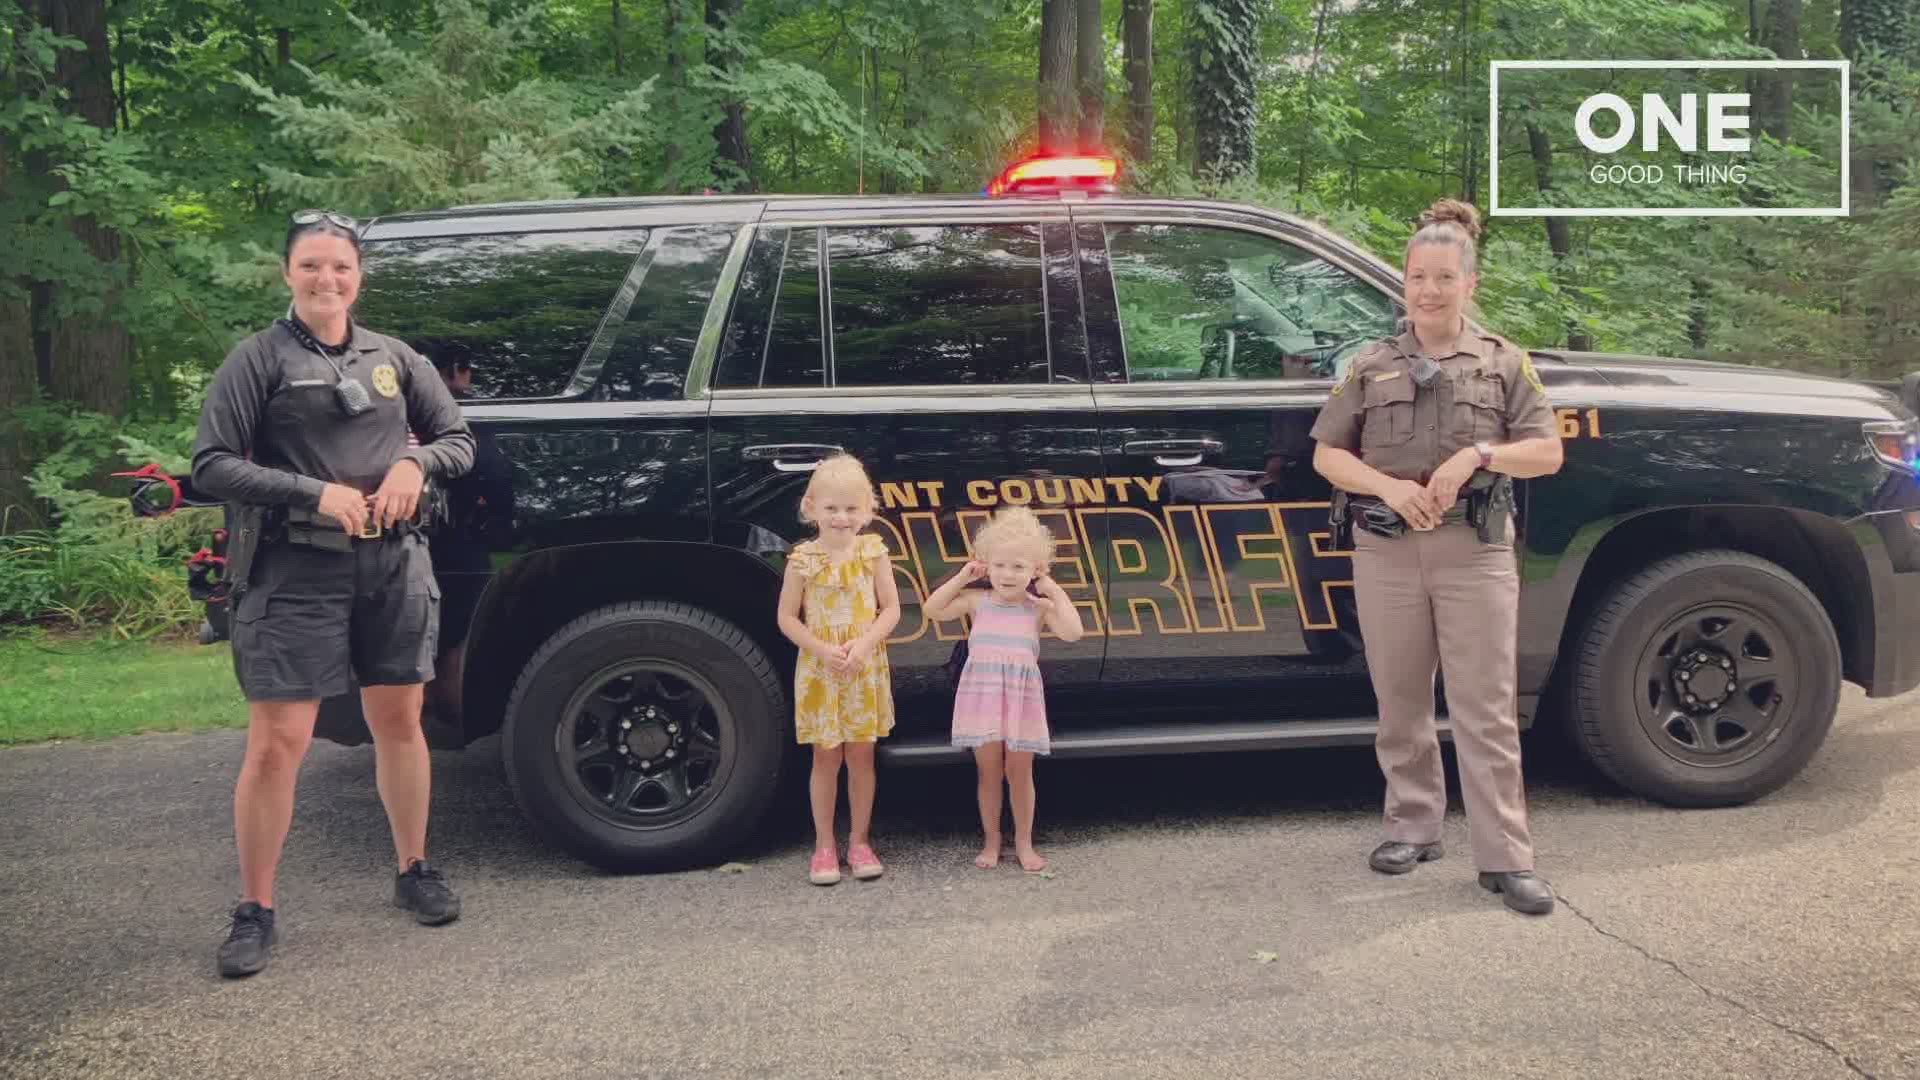 To Evalyn and all the little girls out there who want to be to be police officers, we hope you follow your dream and join the countless female officers who serve.